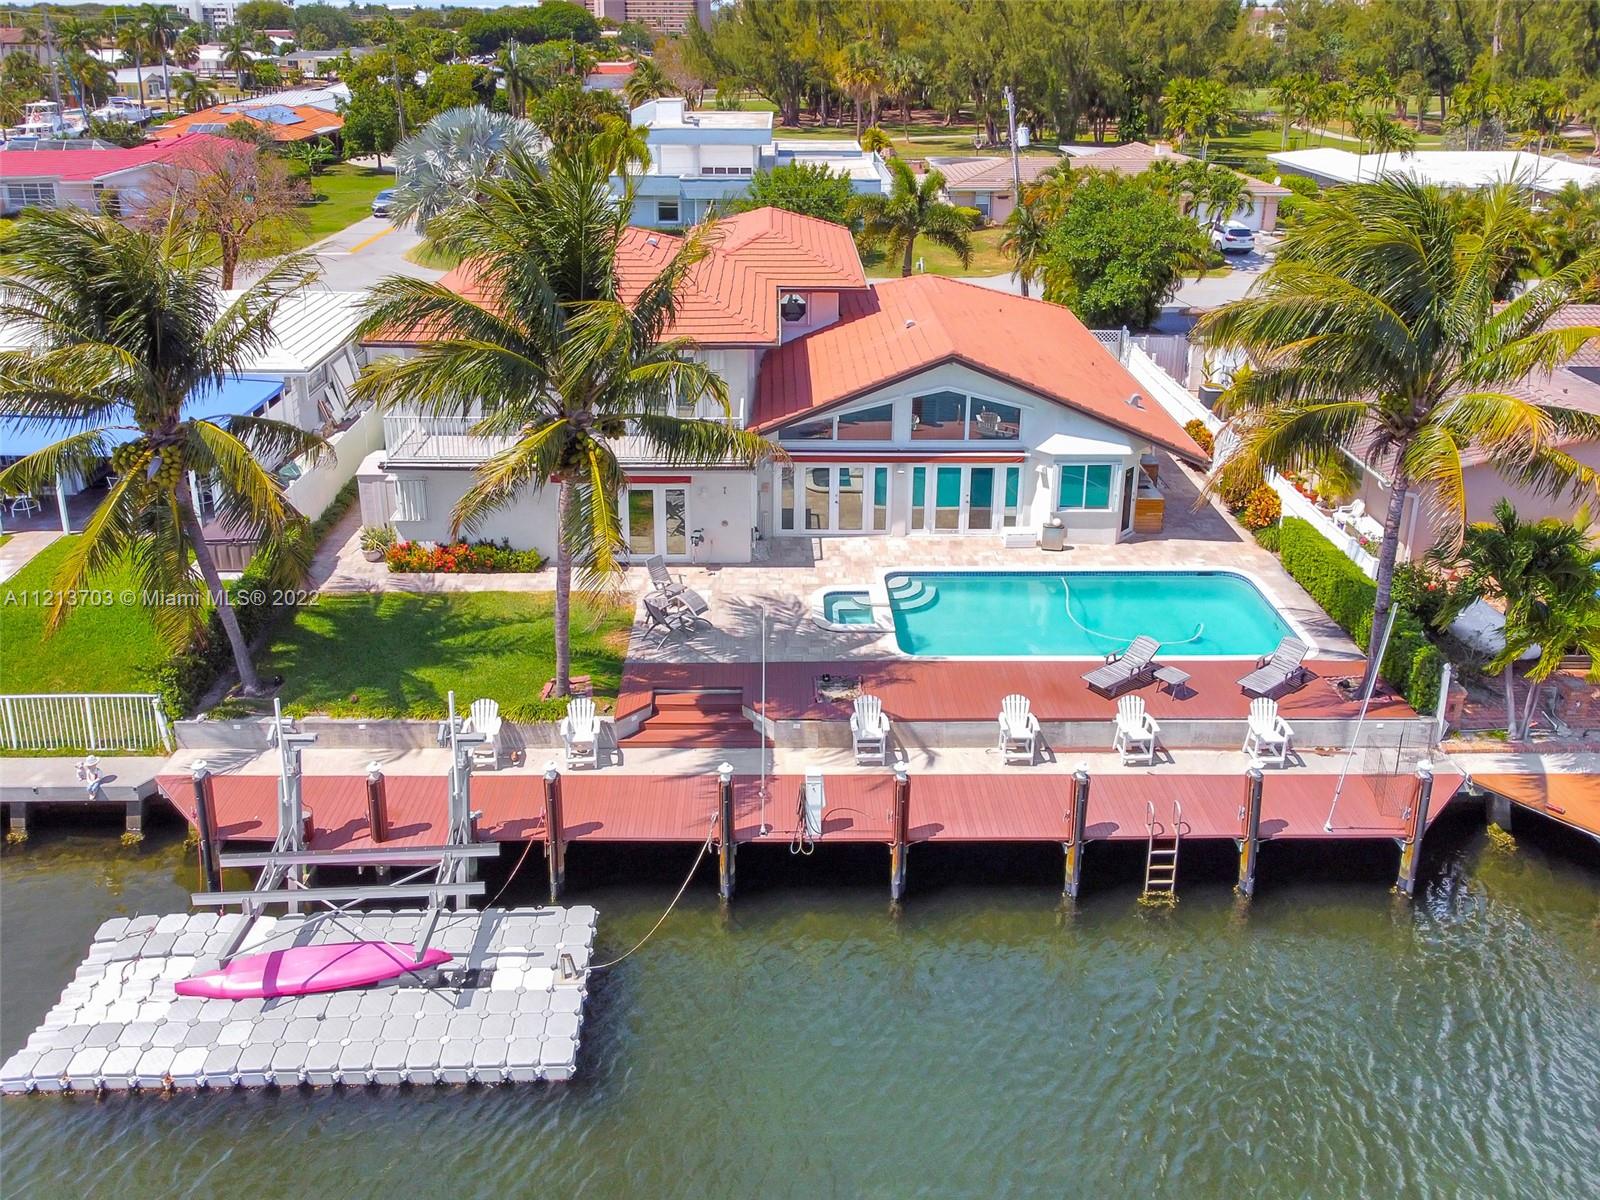 Prestigious Waterfront Single Family Home in the desirable Harbor Village in Pompano Beach . A unique opportunity for those who won’t abide by the ordinary. After many neighbors and visitors asking if this property was for sale… now is your opportunity to own this exclusive upscale and unique 4 Bedroom / 4 Bathroom Home with open floor plan, Outdoor Kitchen Pool & Spa and much more to enjoy all year round Florida's Weather. A boater's dream house with no fixed bridge and direct ocean access. Stunning water view from everywhere giving you a tension-free home of bright. So…Spacious So…Light So…Airy. Harbor Village is one of the most exclusive and secure neighborhoods in Pompano Beach, FL.